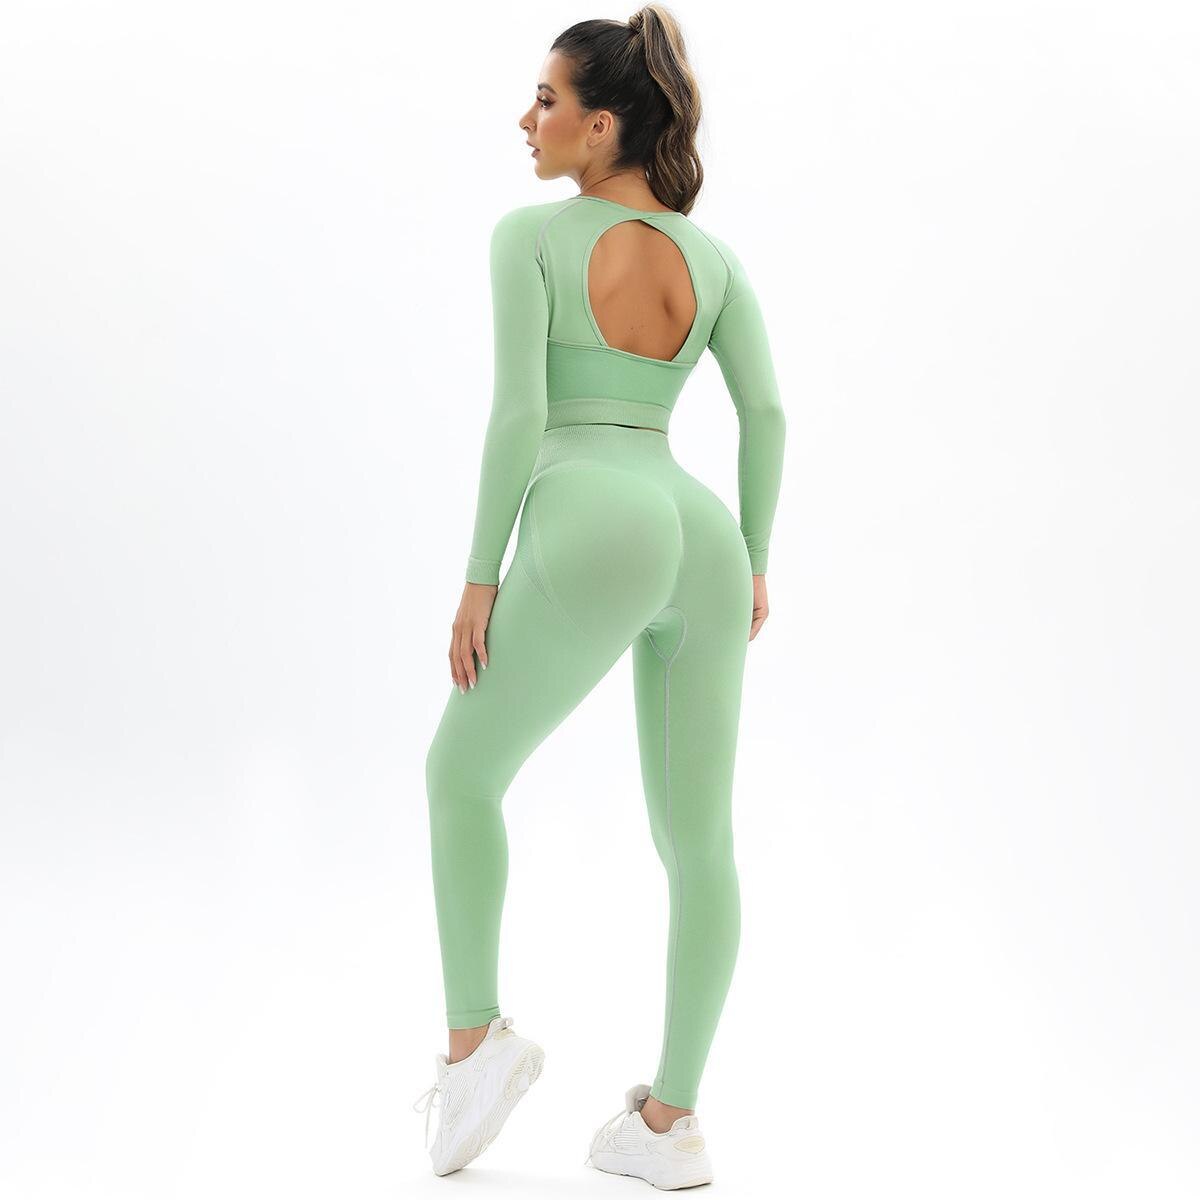 2-Pieces-Yoga-Sets-Sport-Femme-Activewear-Set-Girls-Seamless-Fitness-Suit-Workout-Clothes-Athletic-Wear-4